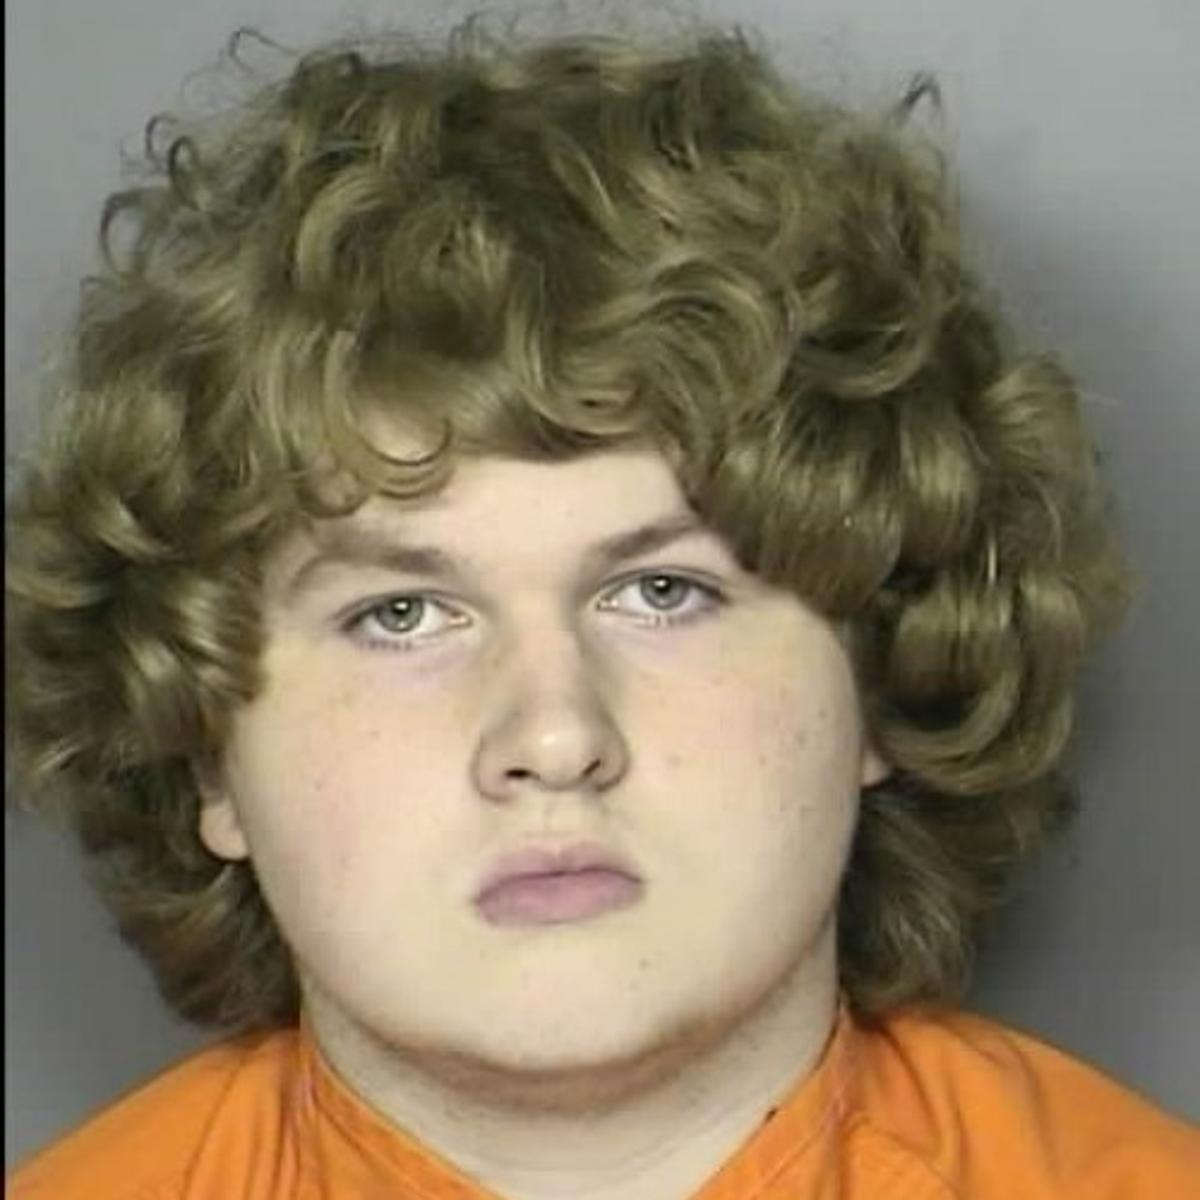 Horry County student arrested after social media threat